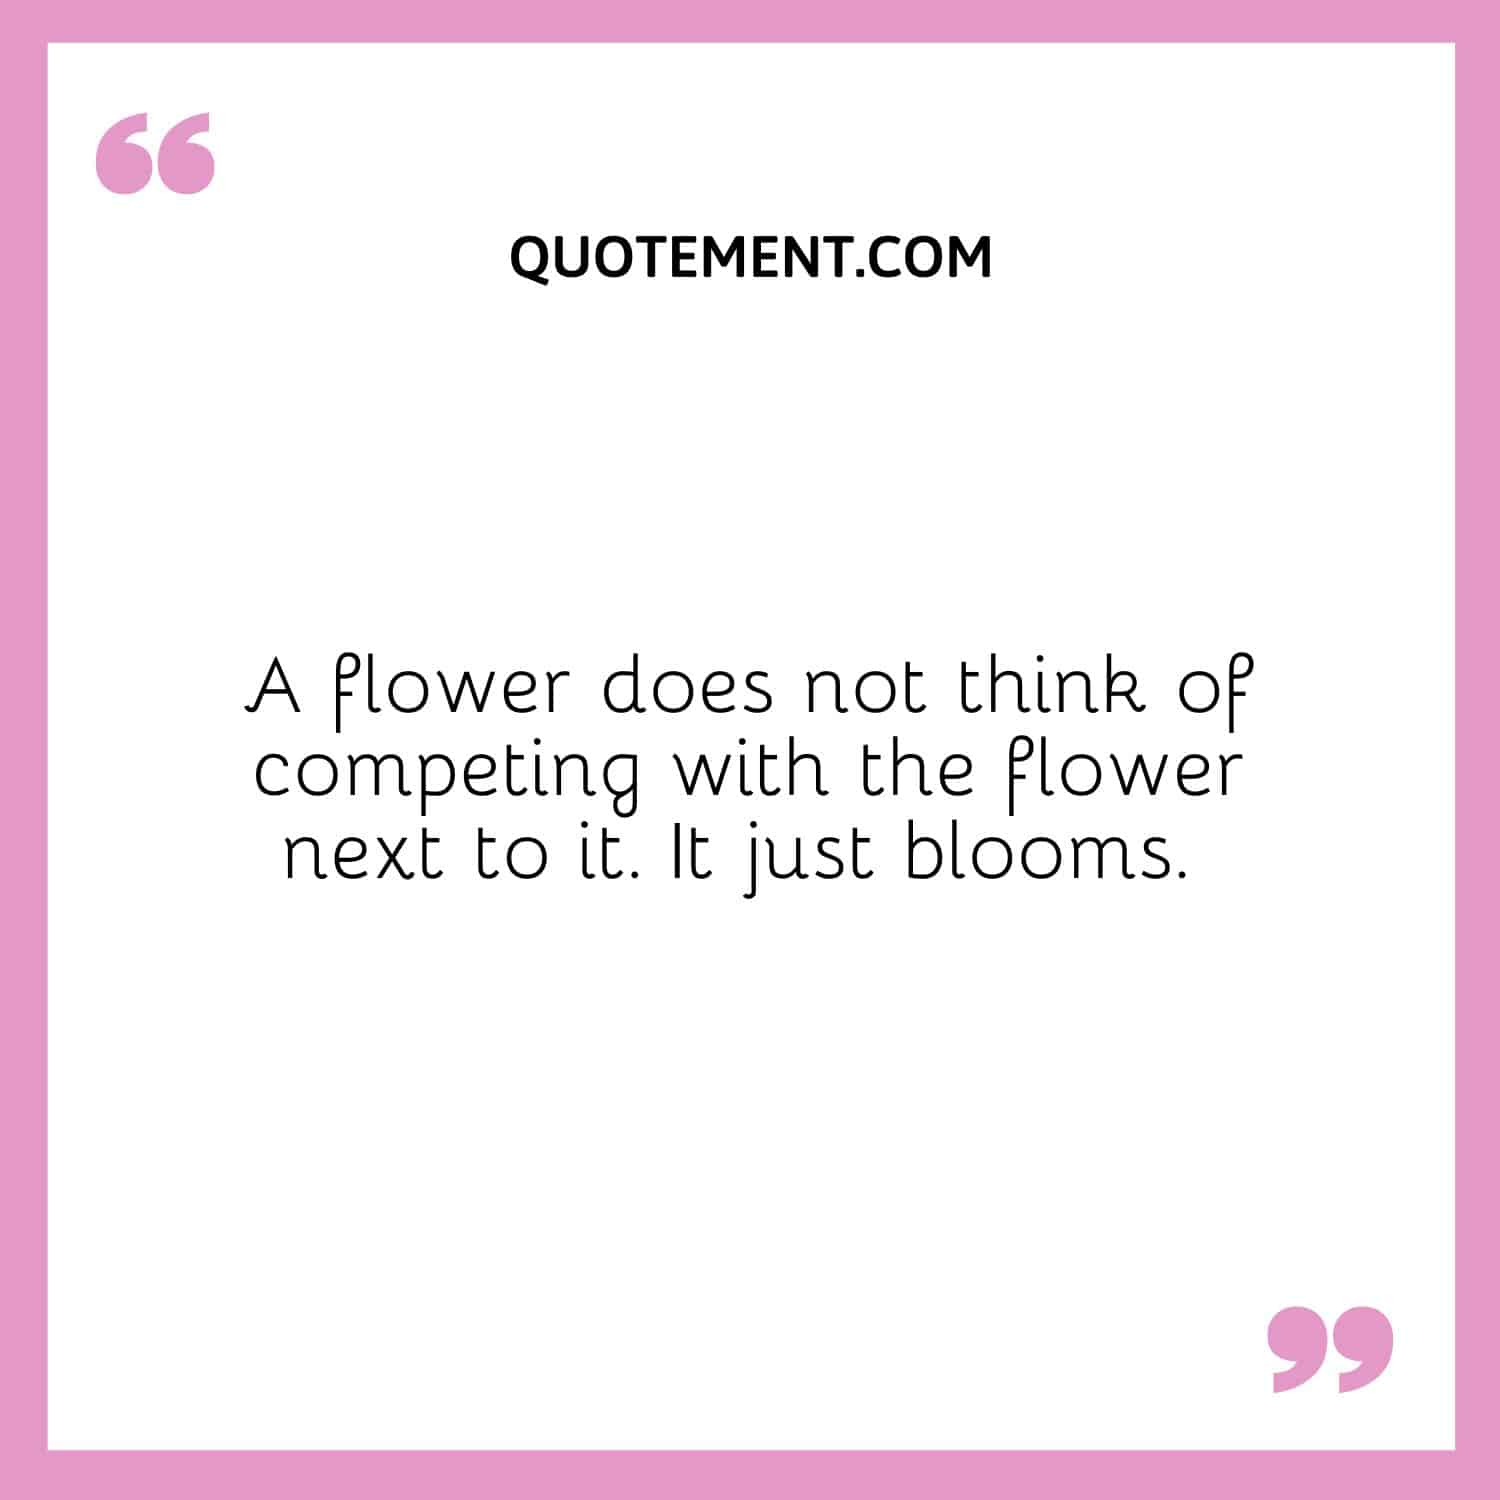 A flower does not think of competing with the flower next to it. It just blooms